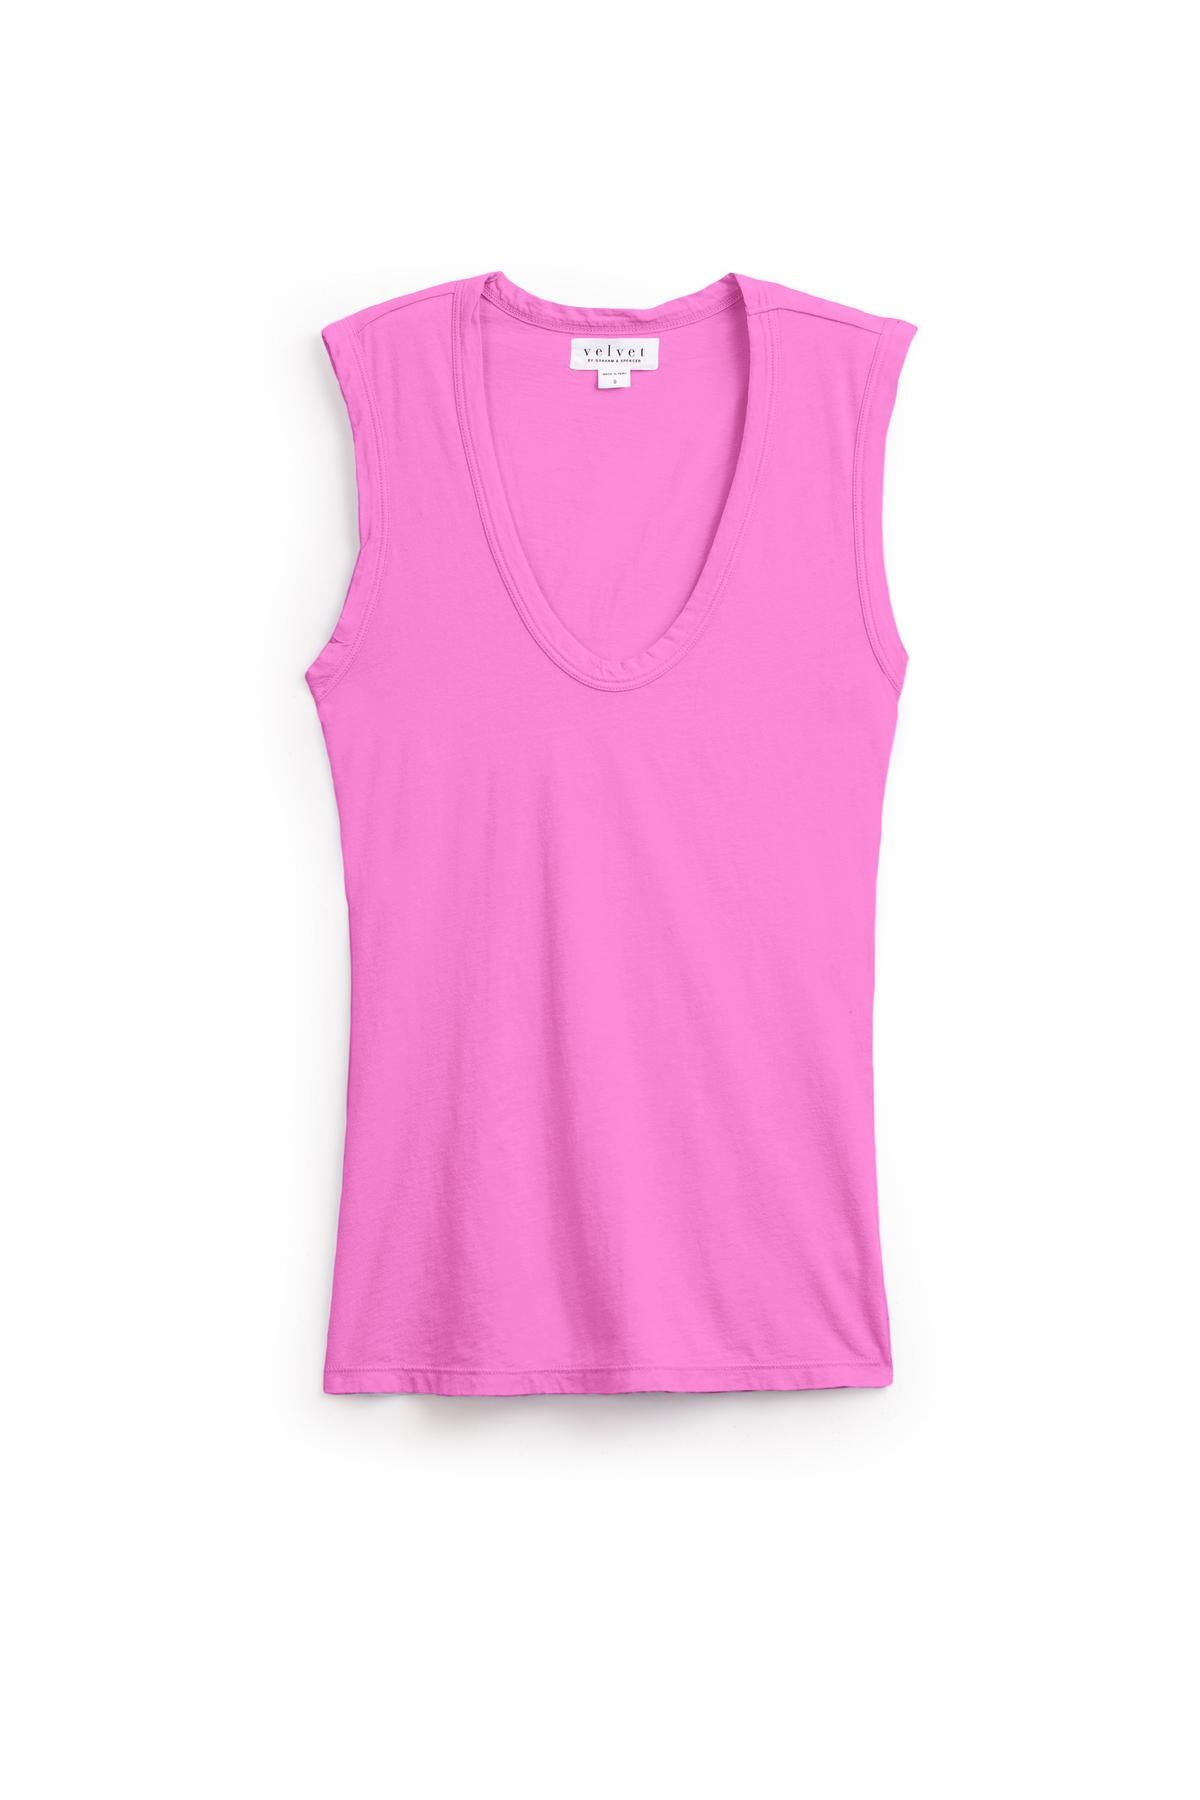   The ESTINA TANK TOP by Velvet by Graham & Spencer is a sleeveless, pink V-neck top on a white background, exuding the laid-back charm of a wearable tank. The top features a label on the inner collar. 